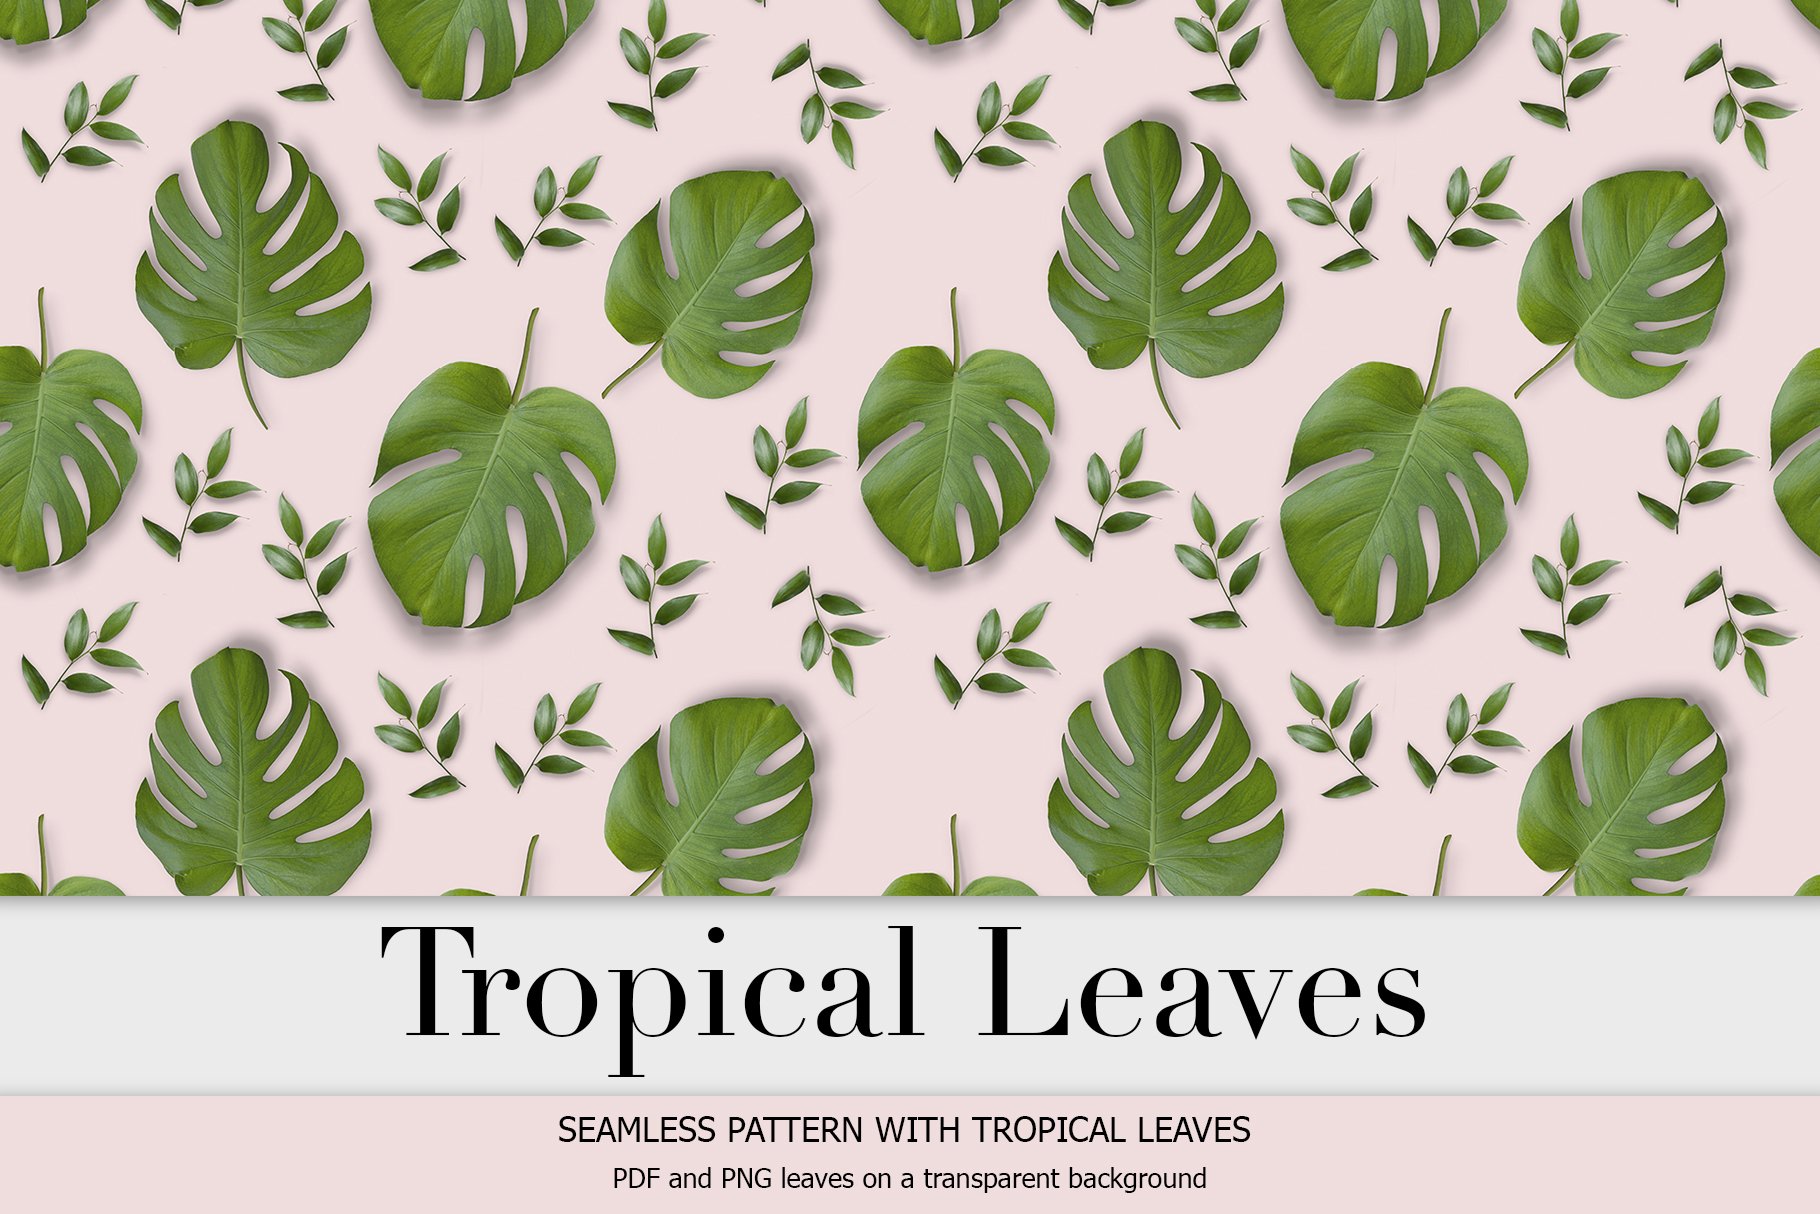 Real tropical leaves preview image.